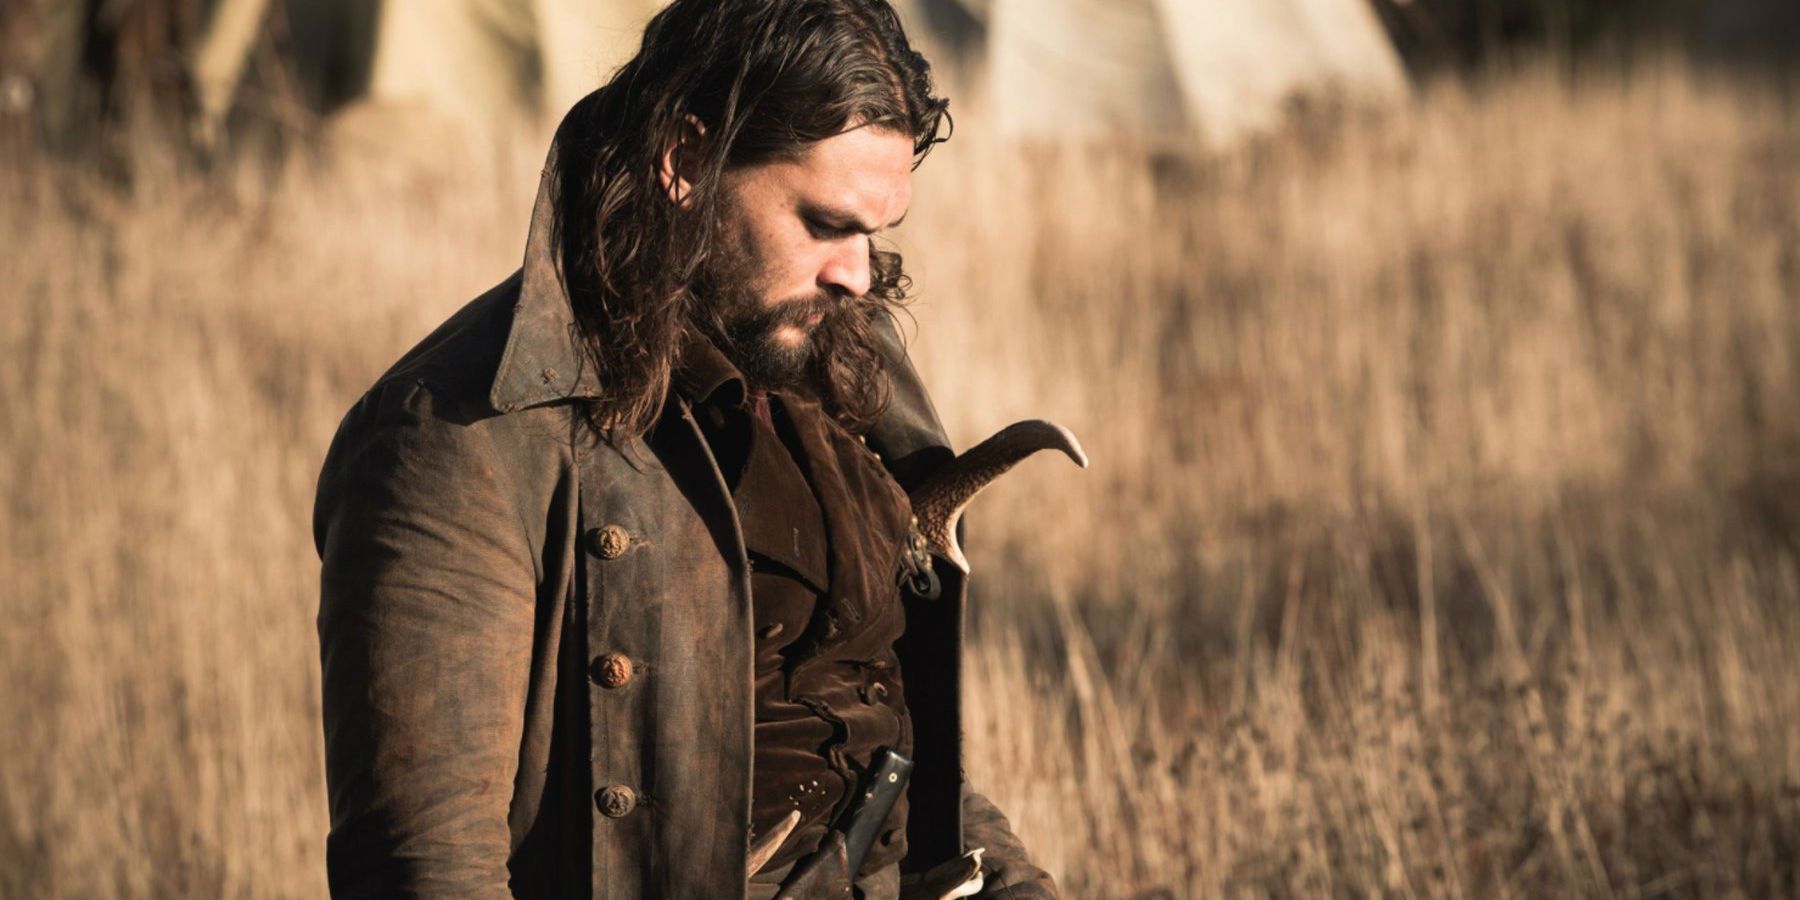 Jason Momoa as Declan Harp with his head down in a field in Frontier